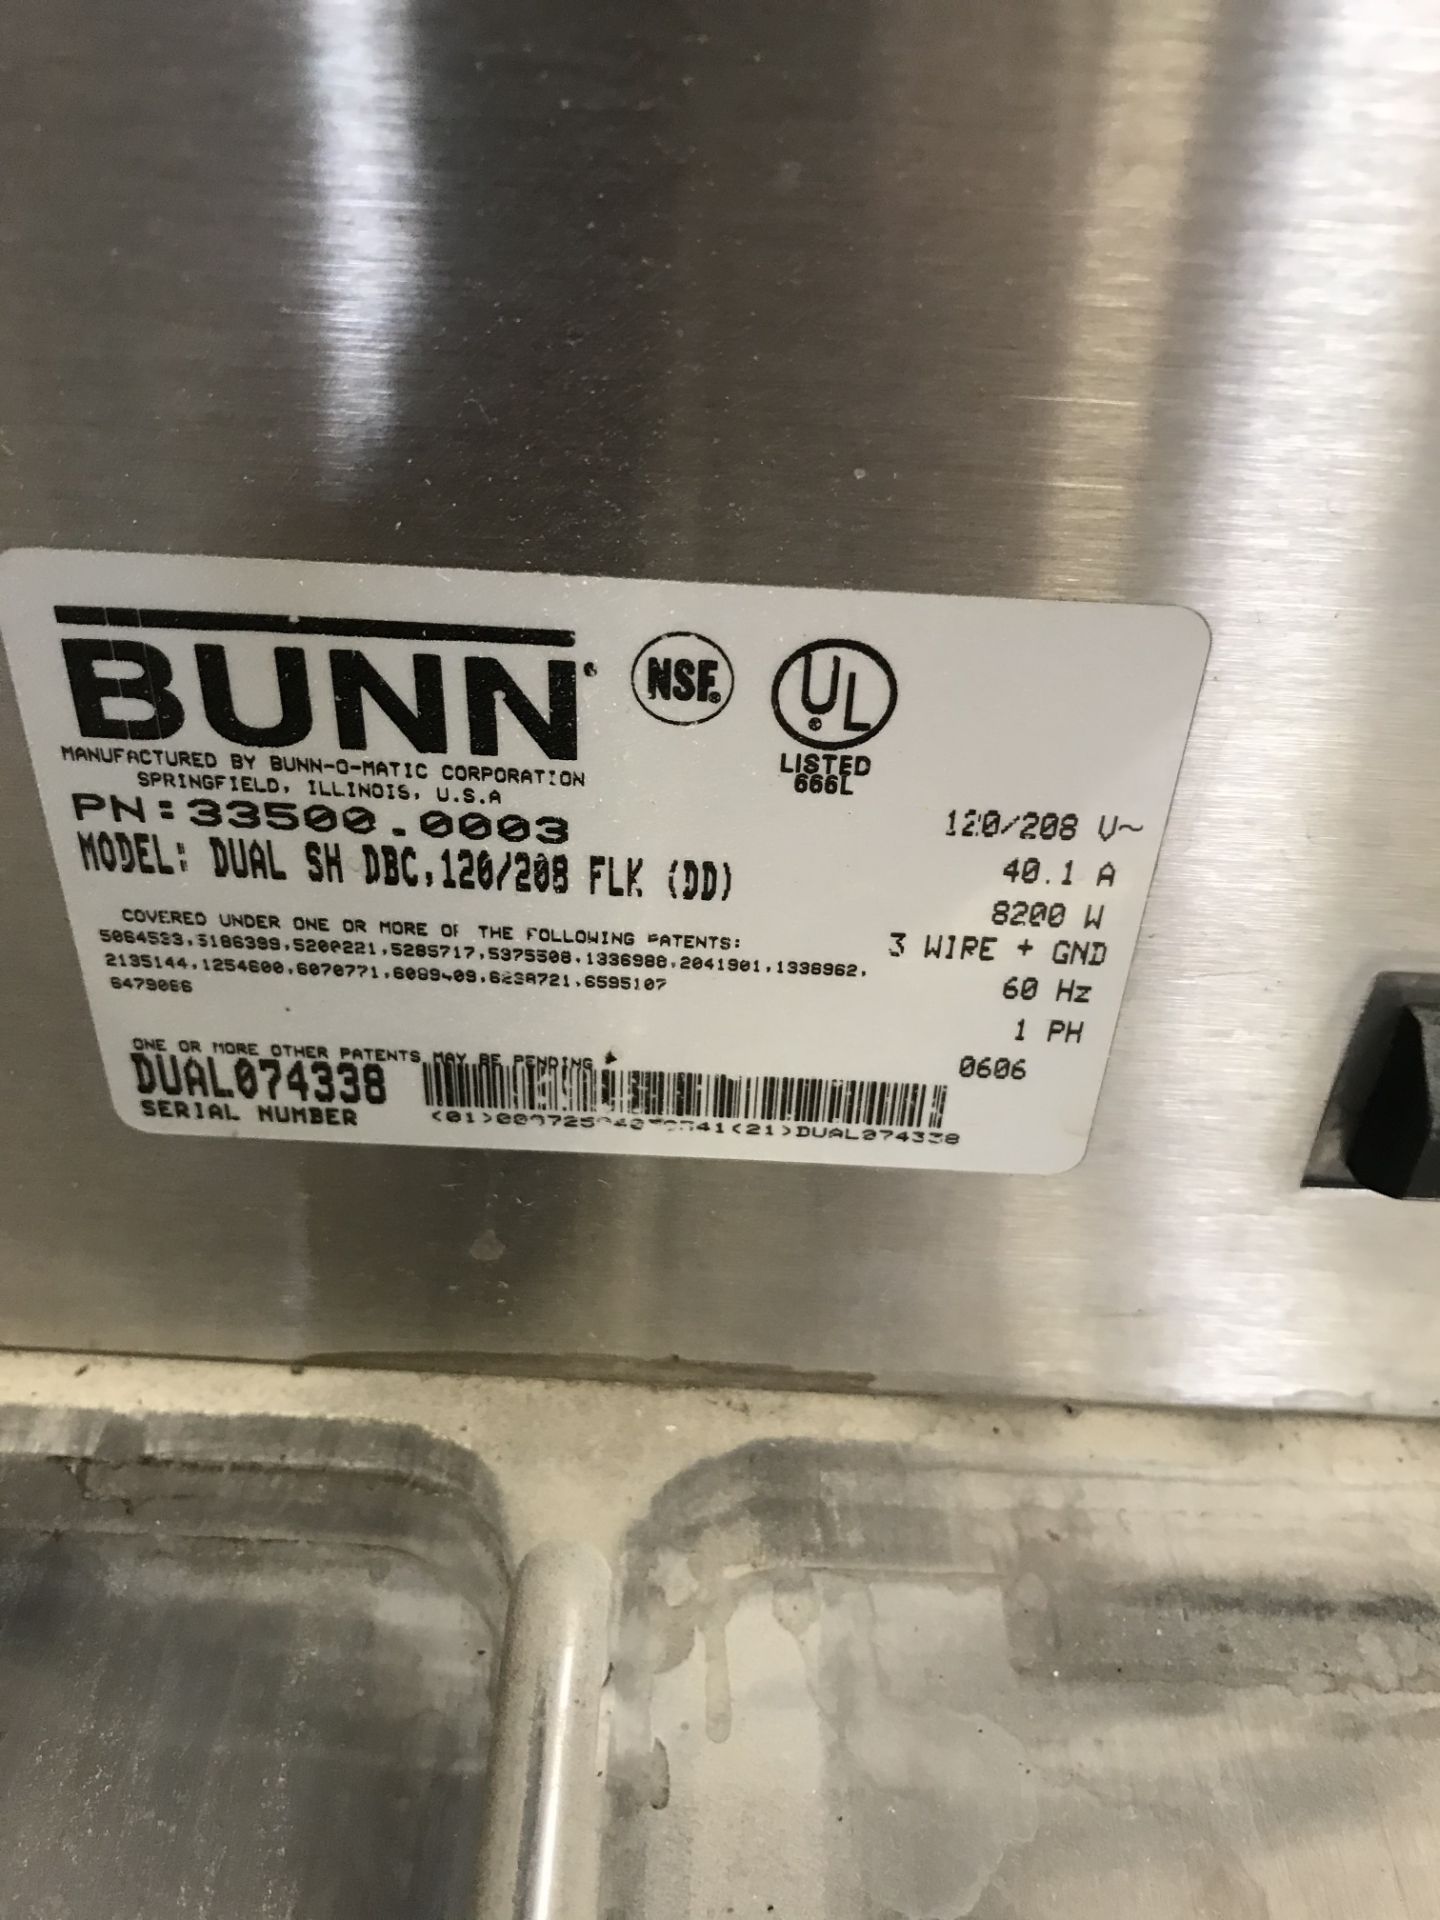 Bunn Dual, Digital Brew Control Coffee Machine #DualSH SN:074338 with (2) Server Stands #SHServer - Image 2 of 2